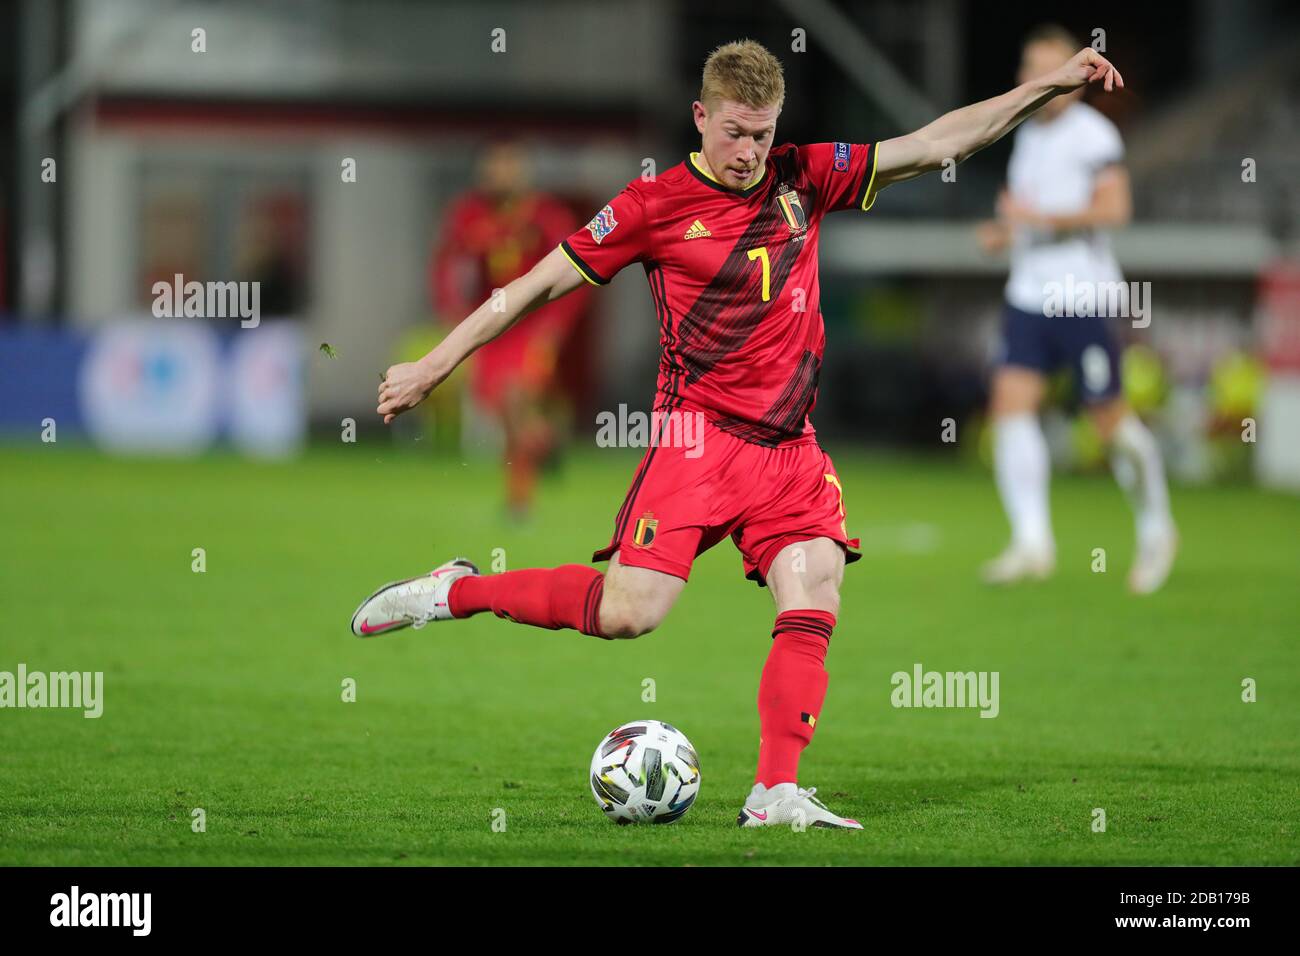 (201116) -- LEUVEN, Nov. 16, 2020 (Xinhua) -- Kevin De Bruyne of Belgium shoots during the UEFA Nations League group match between Belgium and England in King Power Stadion At Den Dreef, Leuven, Belgium, Nov. 15, 2020. (Xinhua/Zheng Huansong) Stock Photo